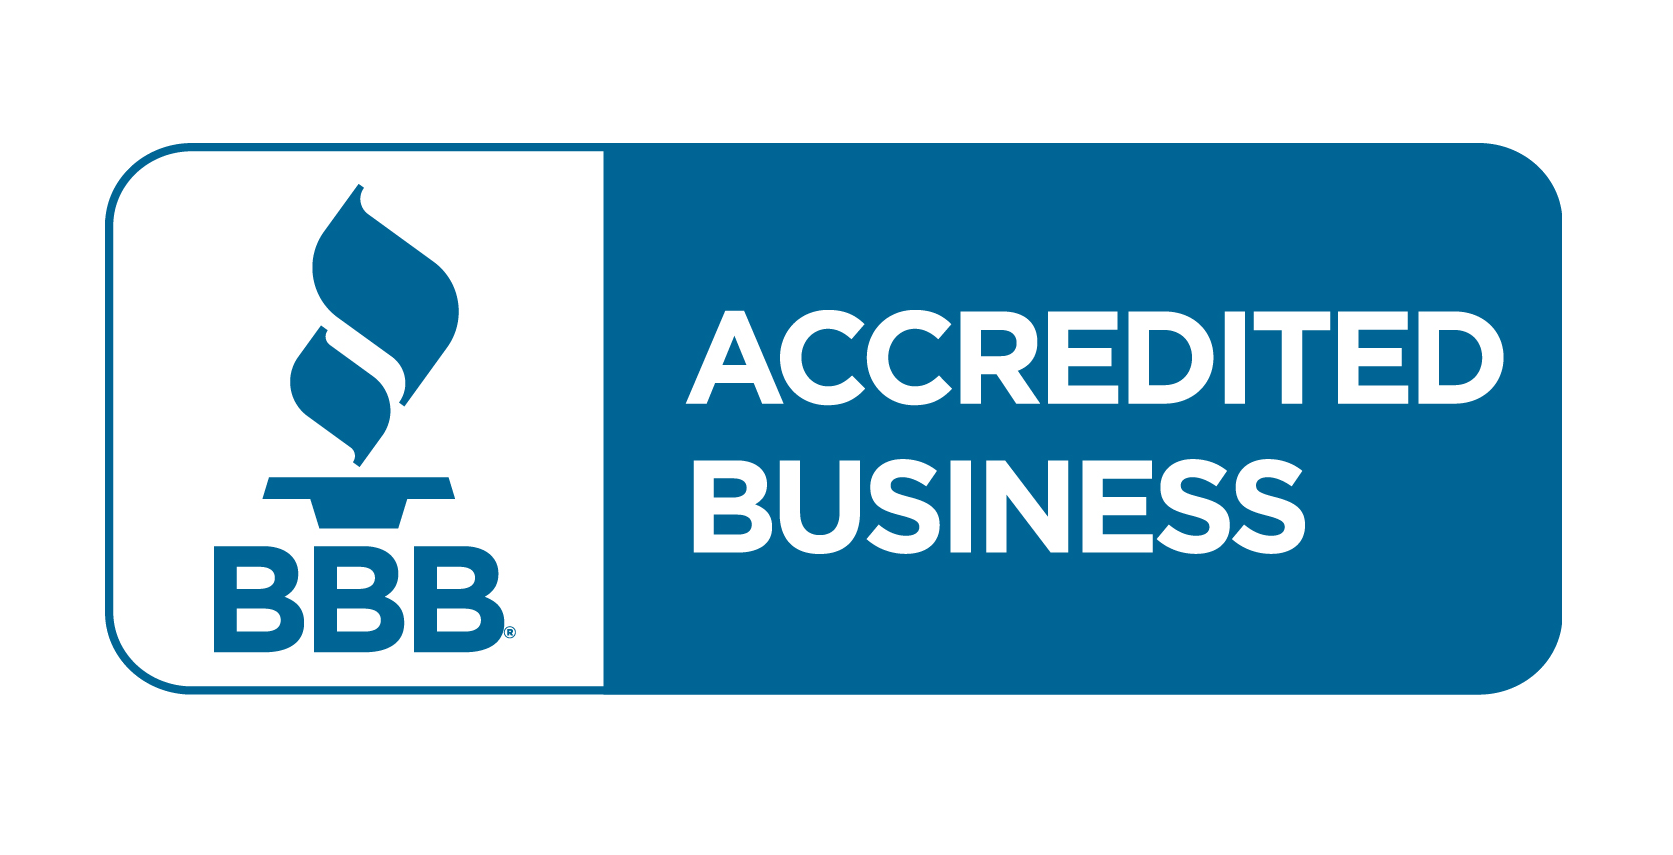 the bbb accredited business logo